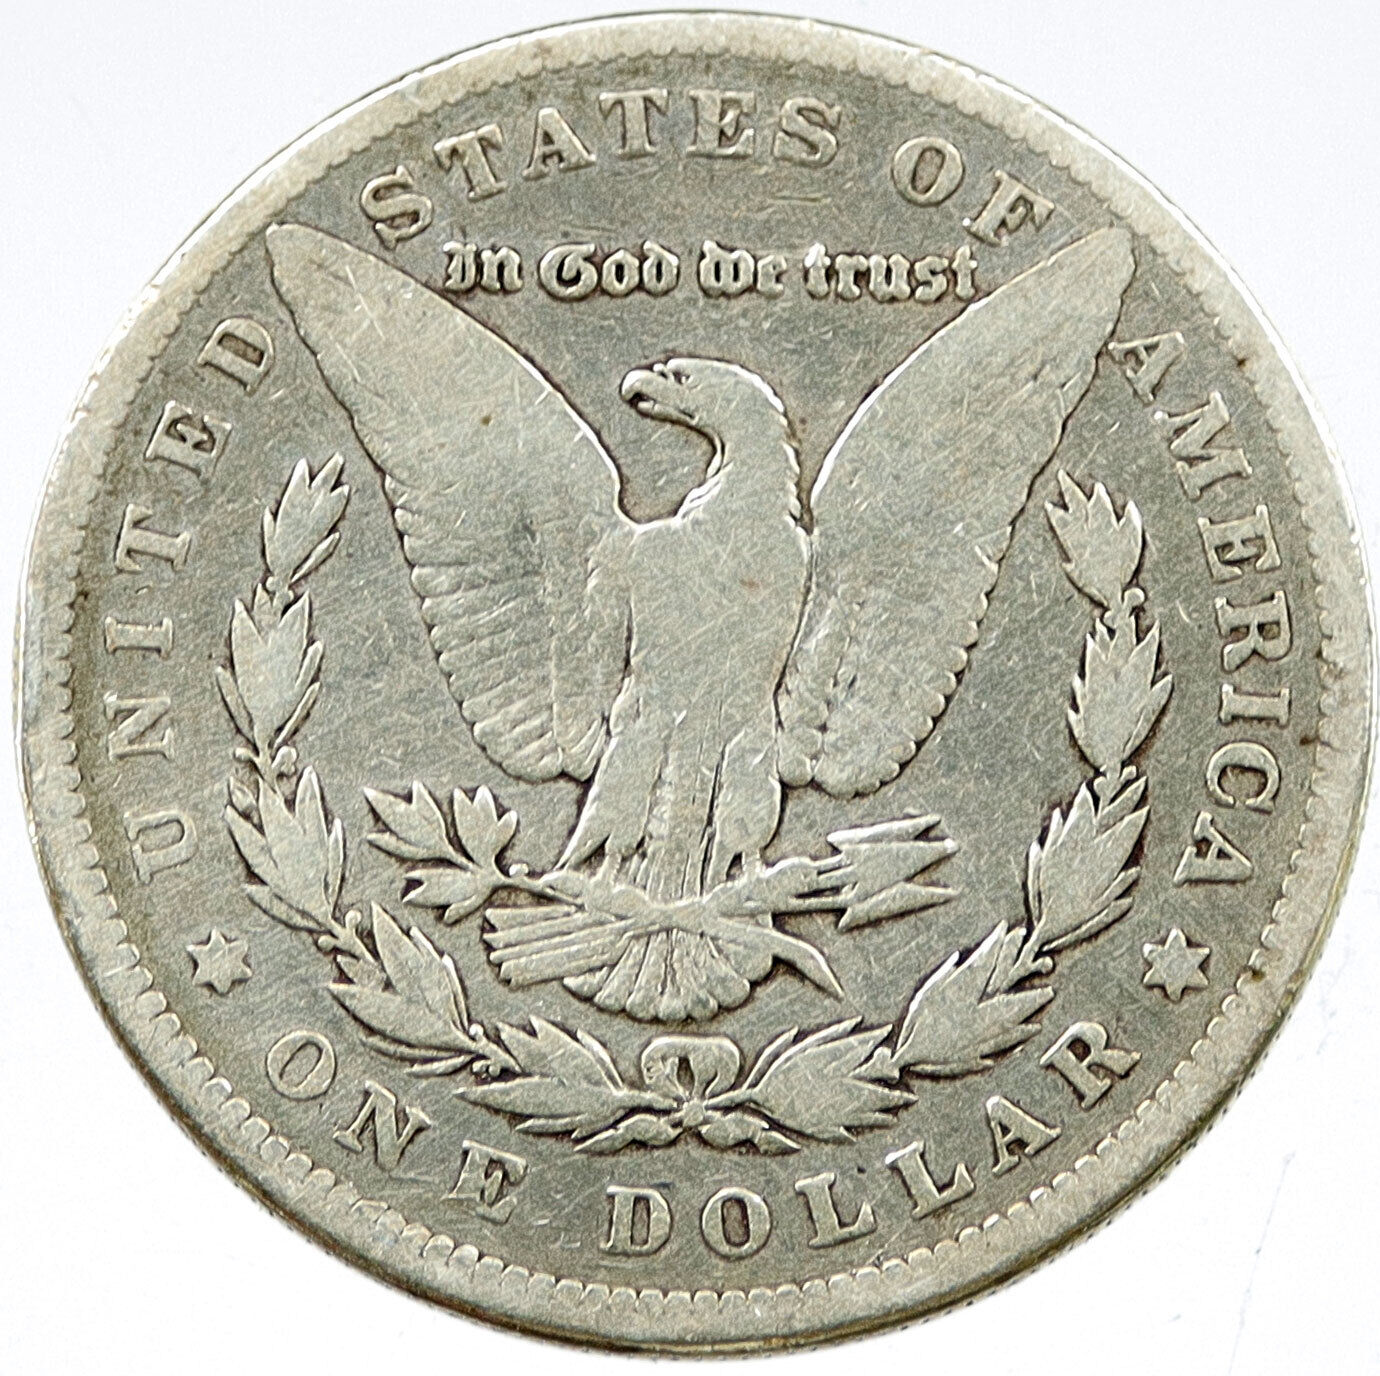 1885 P UNITED STATES of America Eagle Old Silver Morgan US Dollar Coin i117072